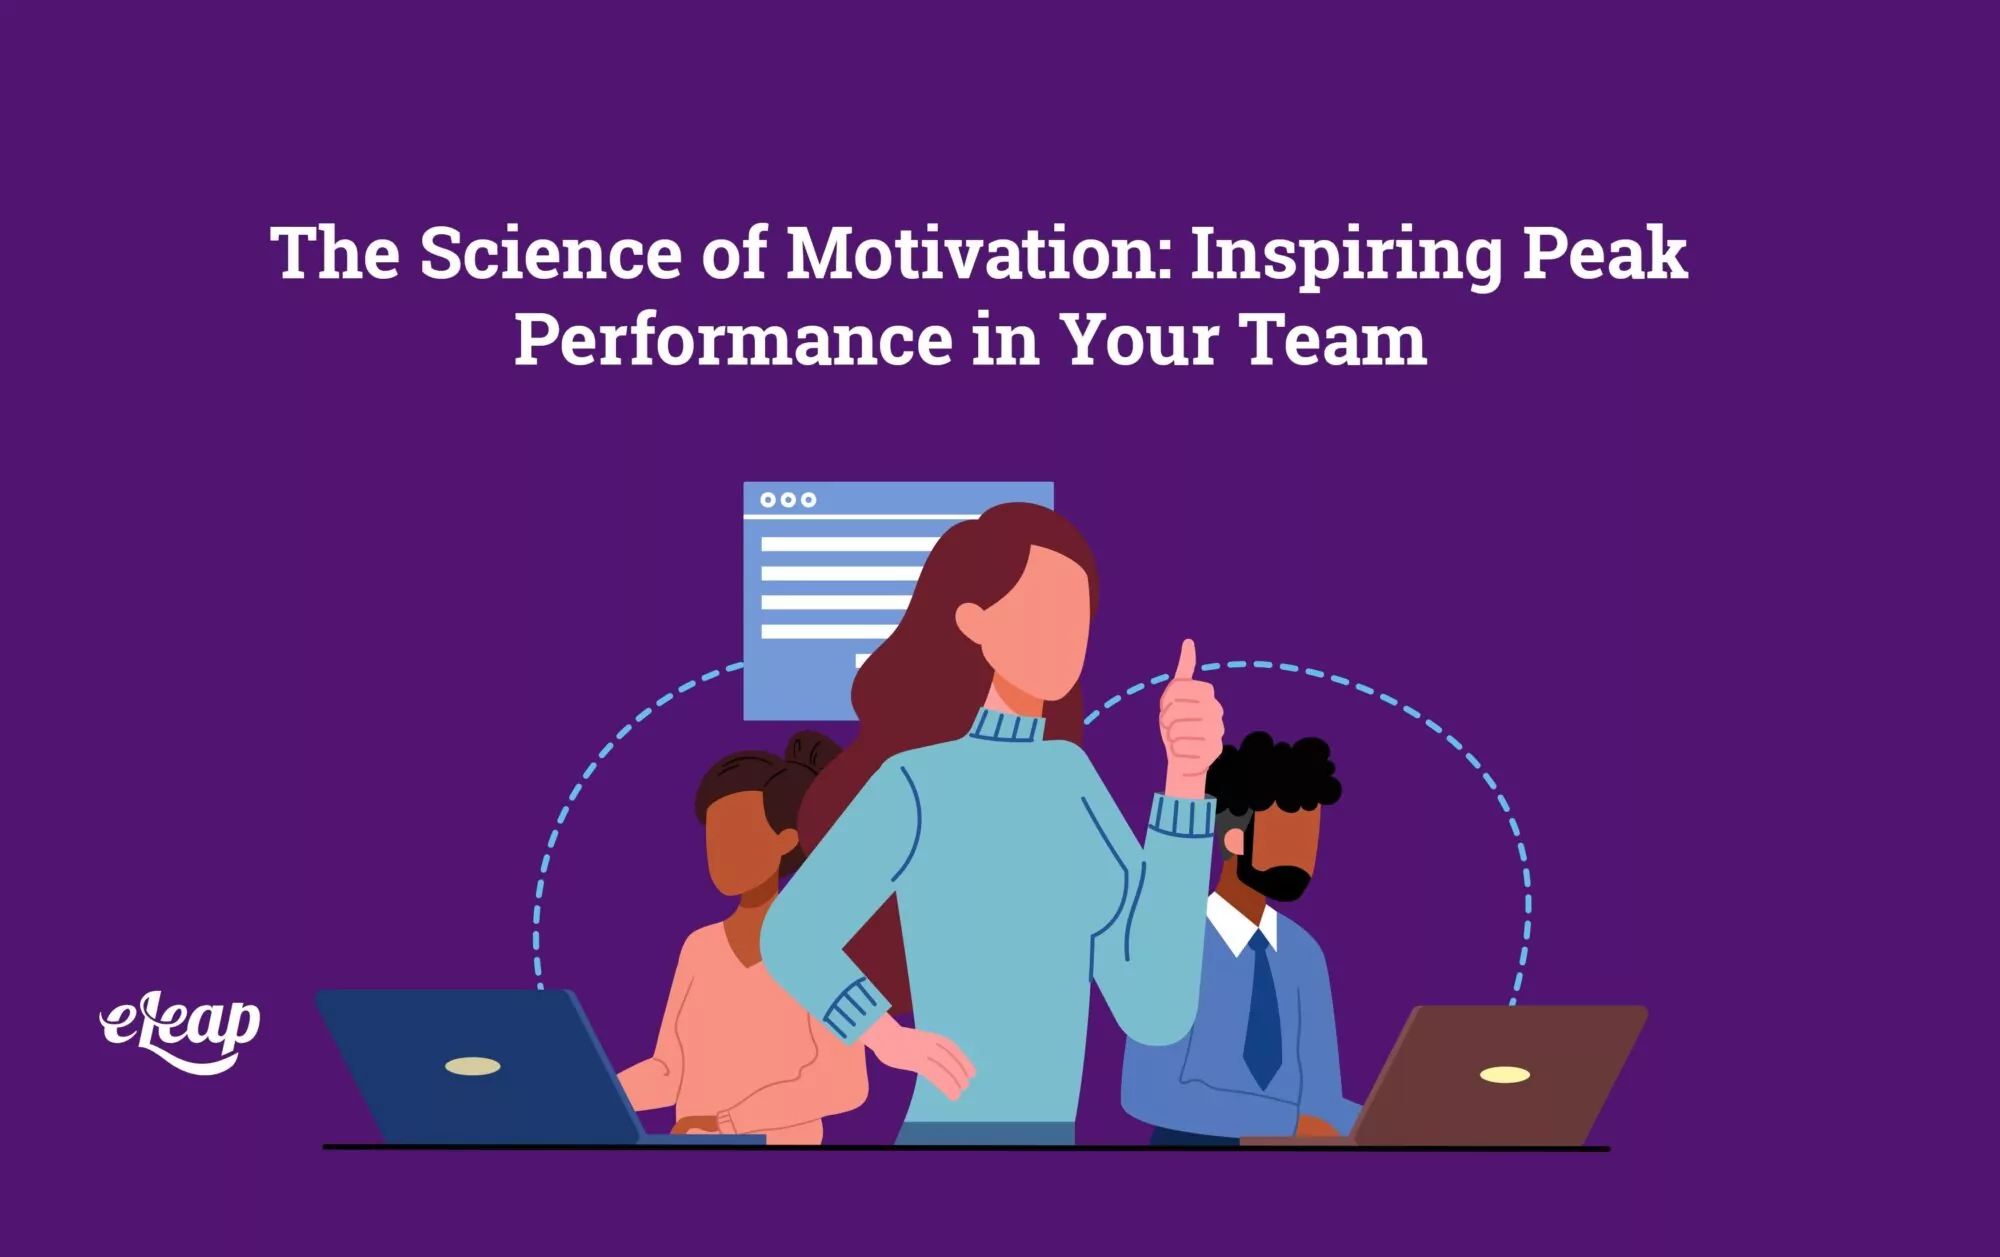 The Science of Motivation: Inspiring Peak Performance in Your Team